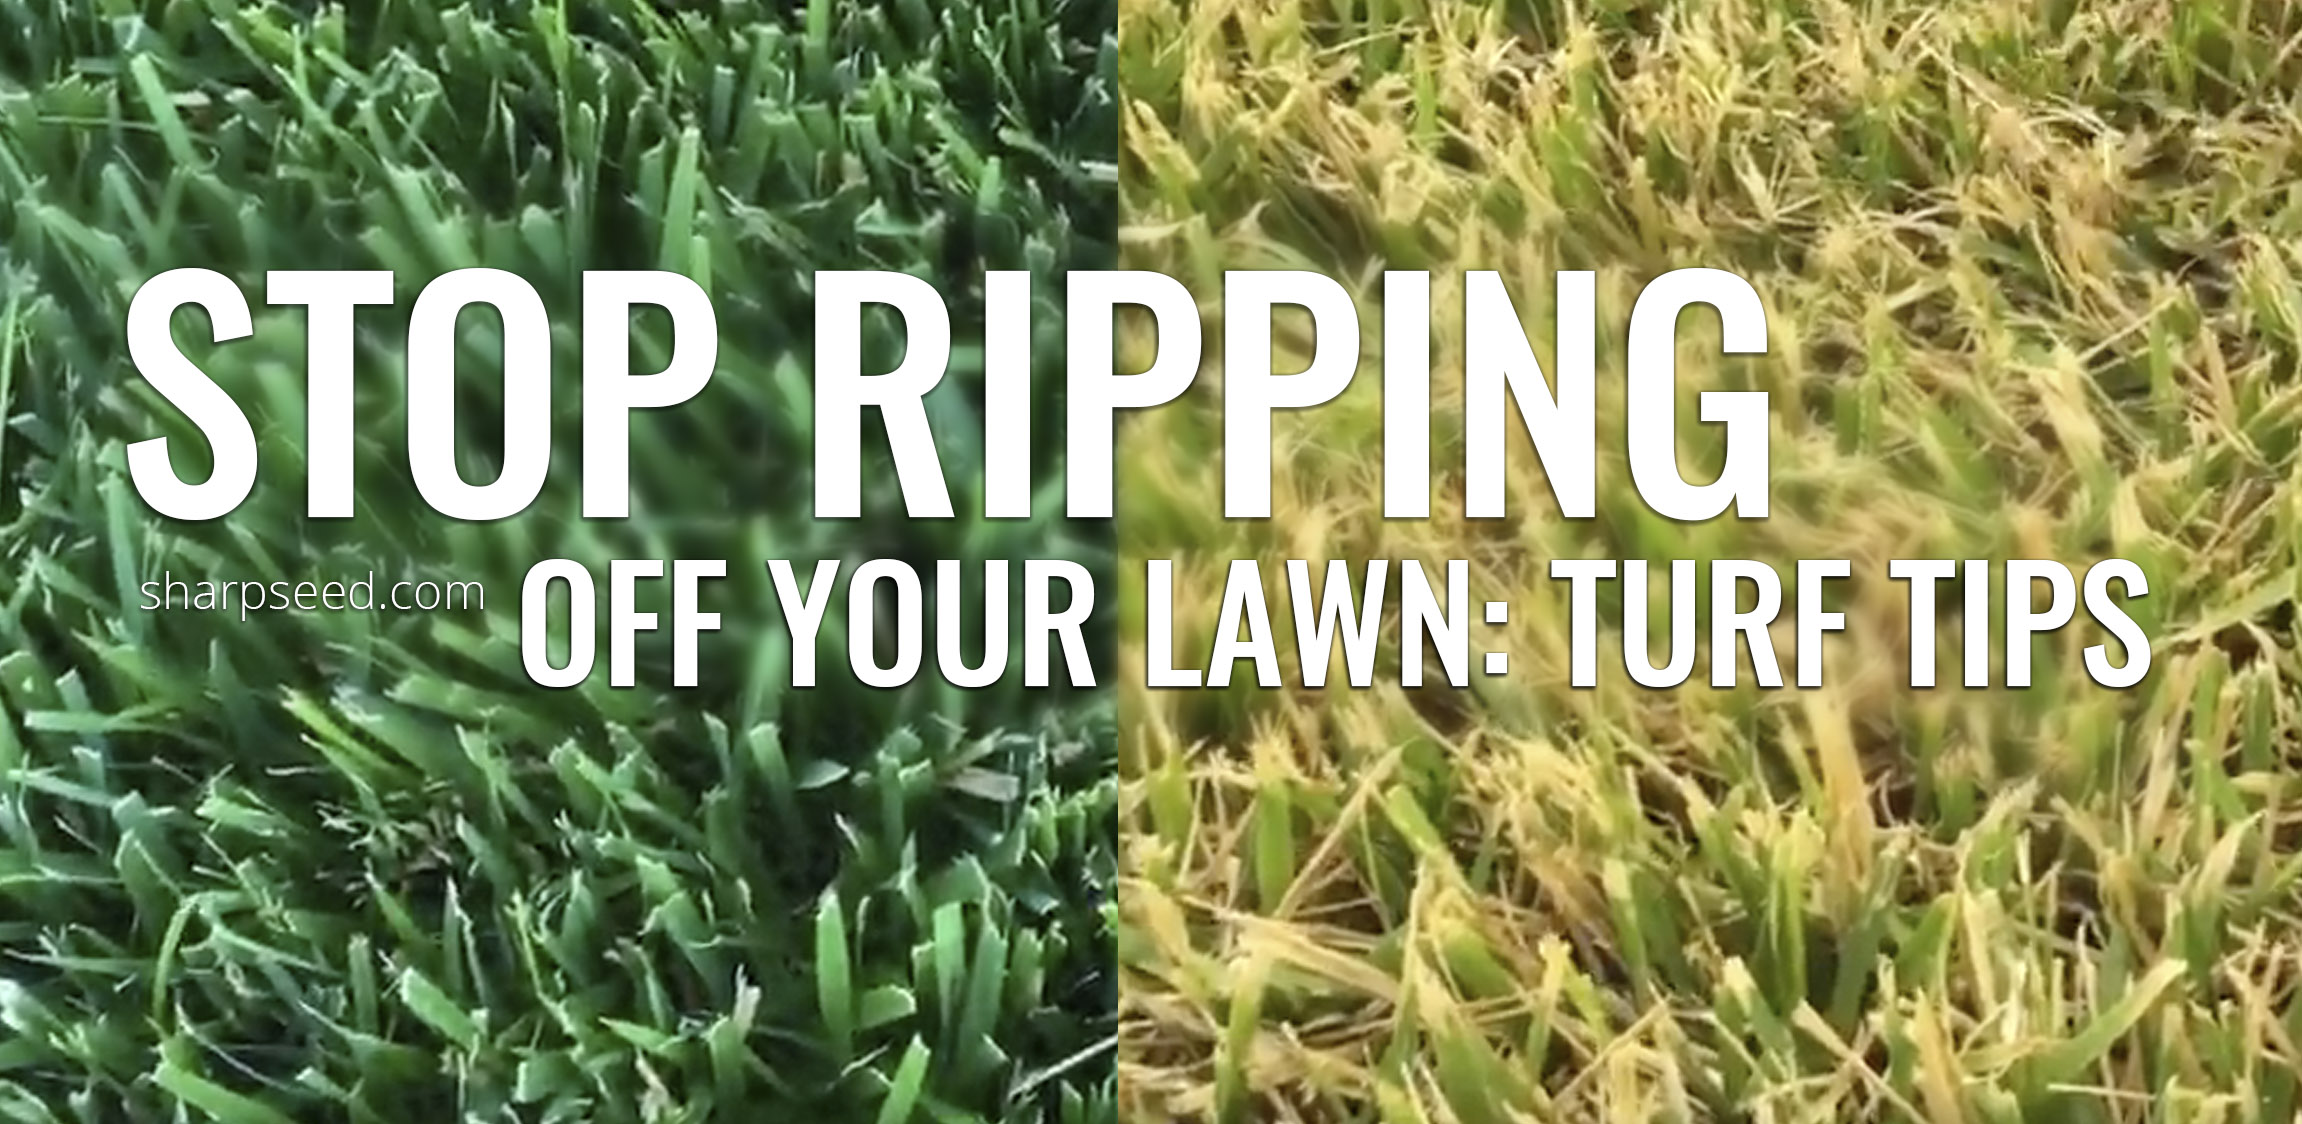 Stop Ripping Off Your Lawn: Turf Tips for Cool Season Grass